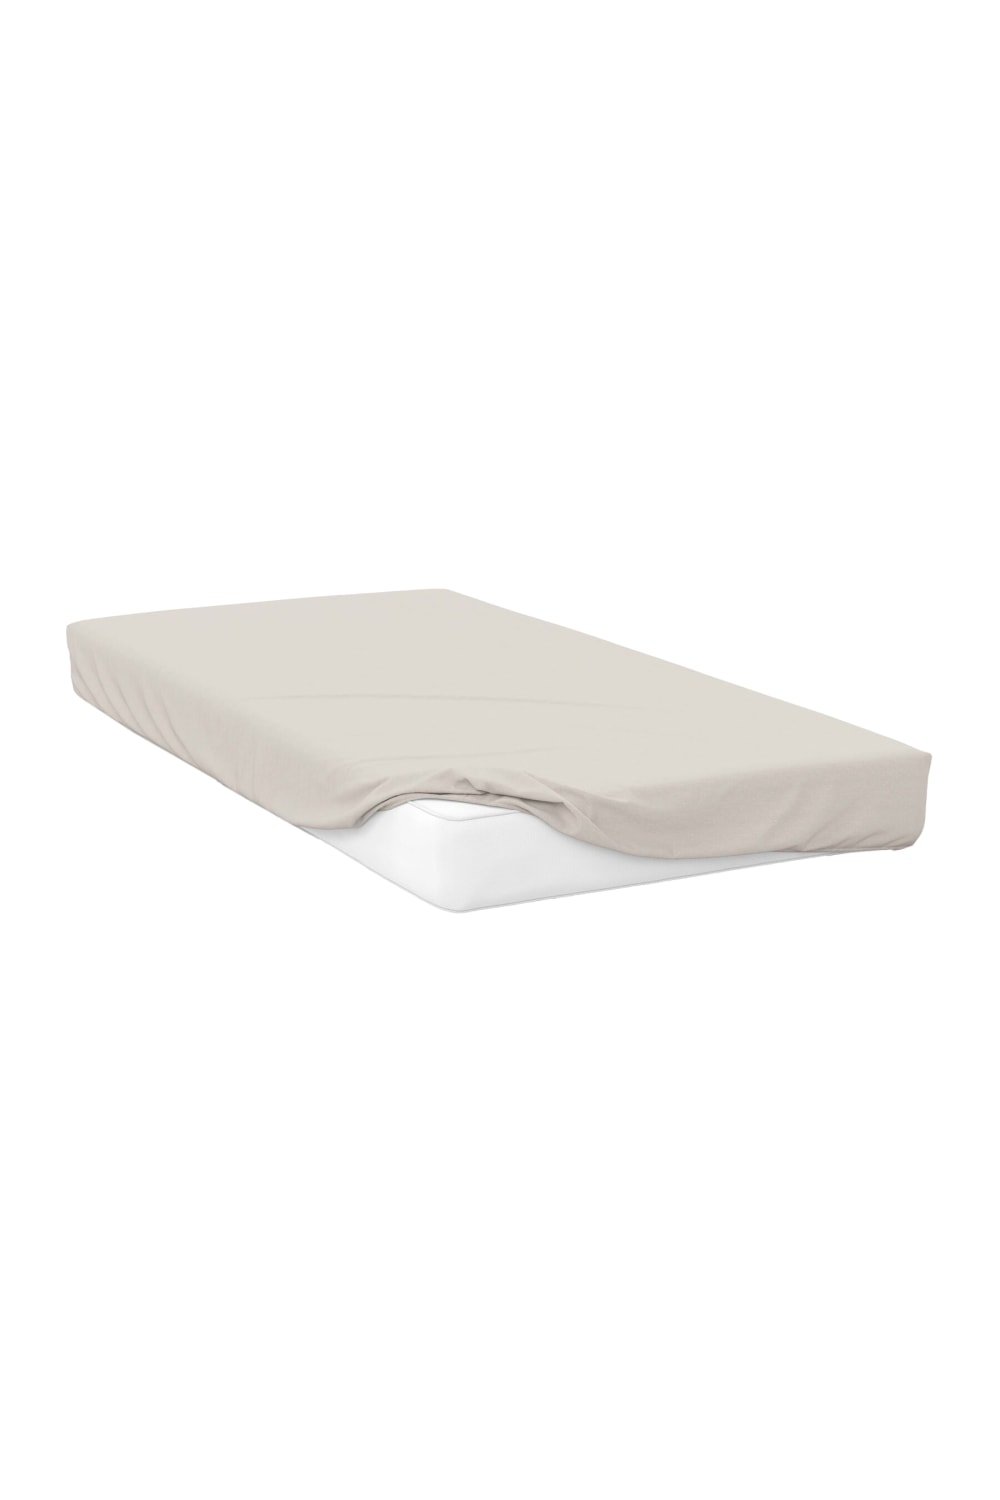 Belledorm Percale Extra Deep Fitted Sheet (Ivory) (Queen) (UK - King)